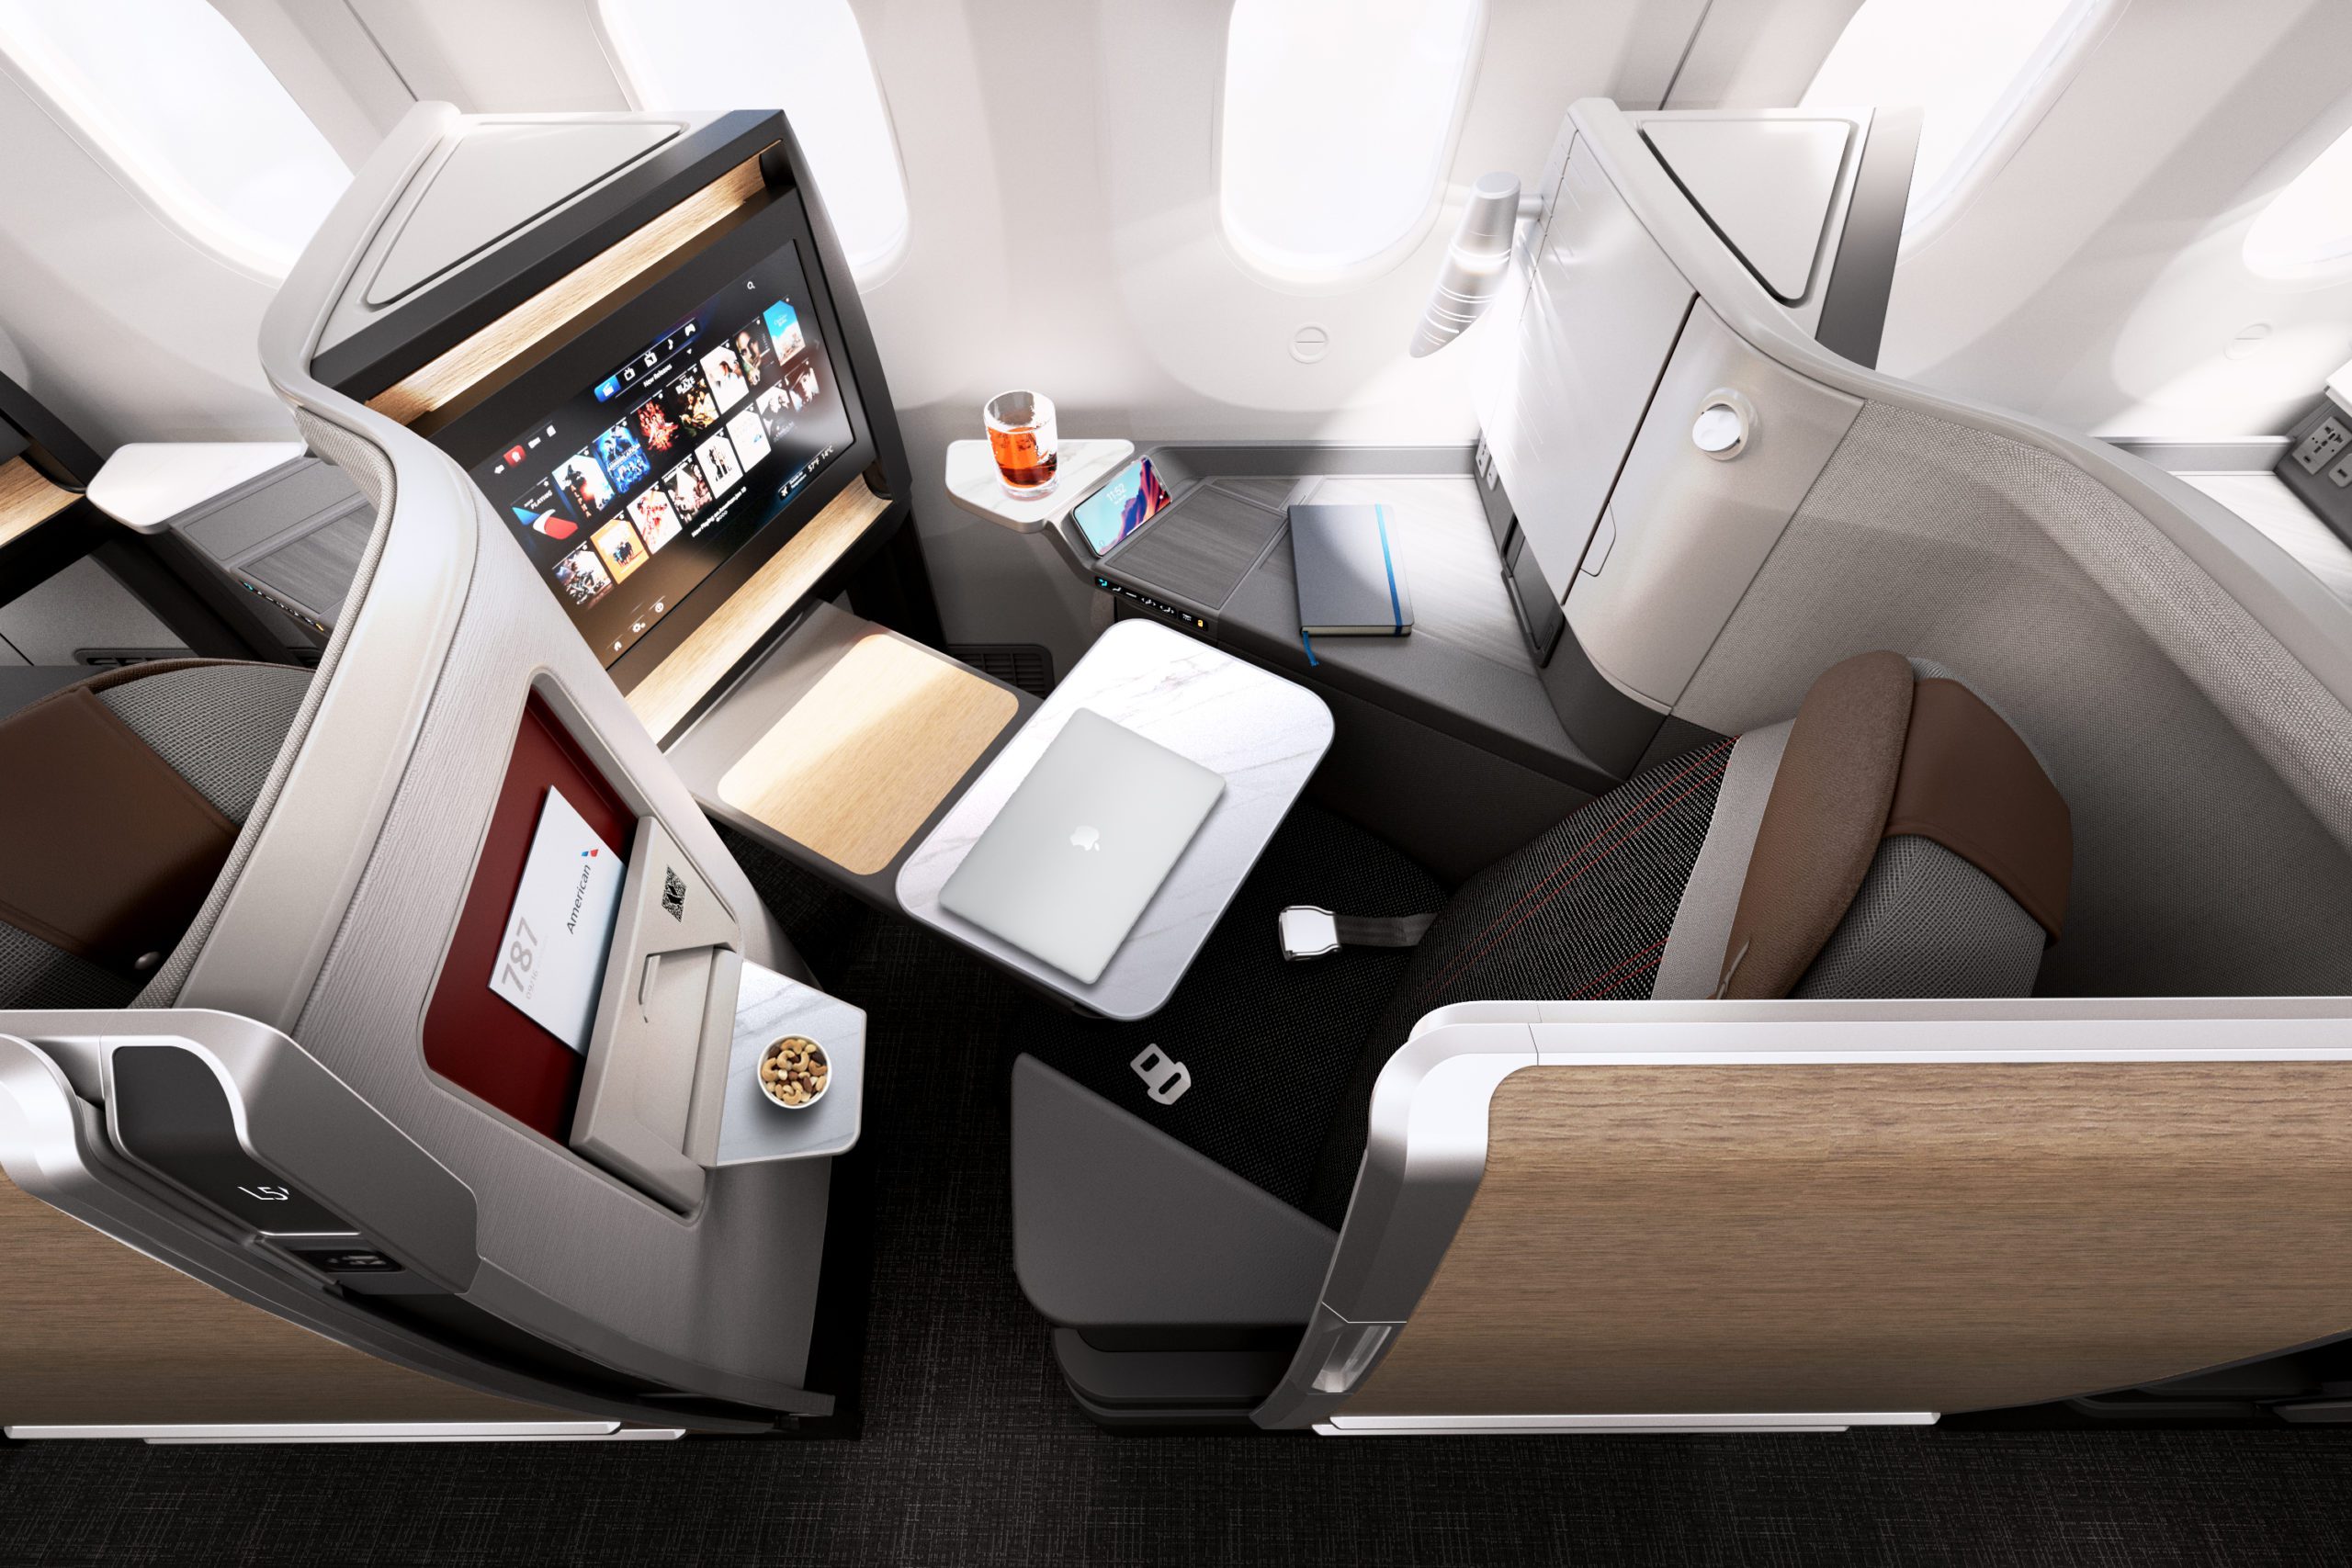 american airlines seat selection business class